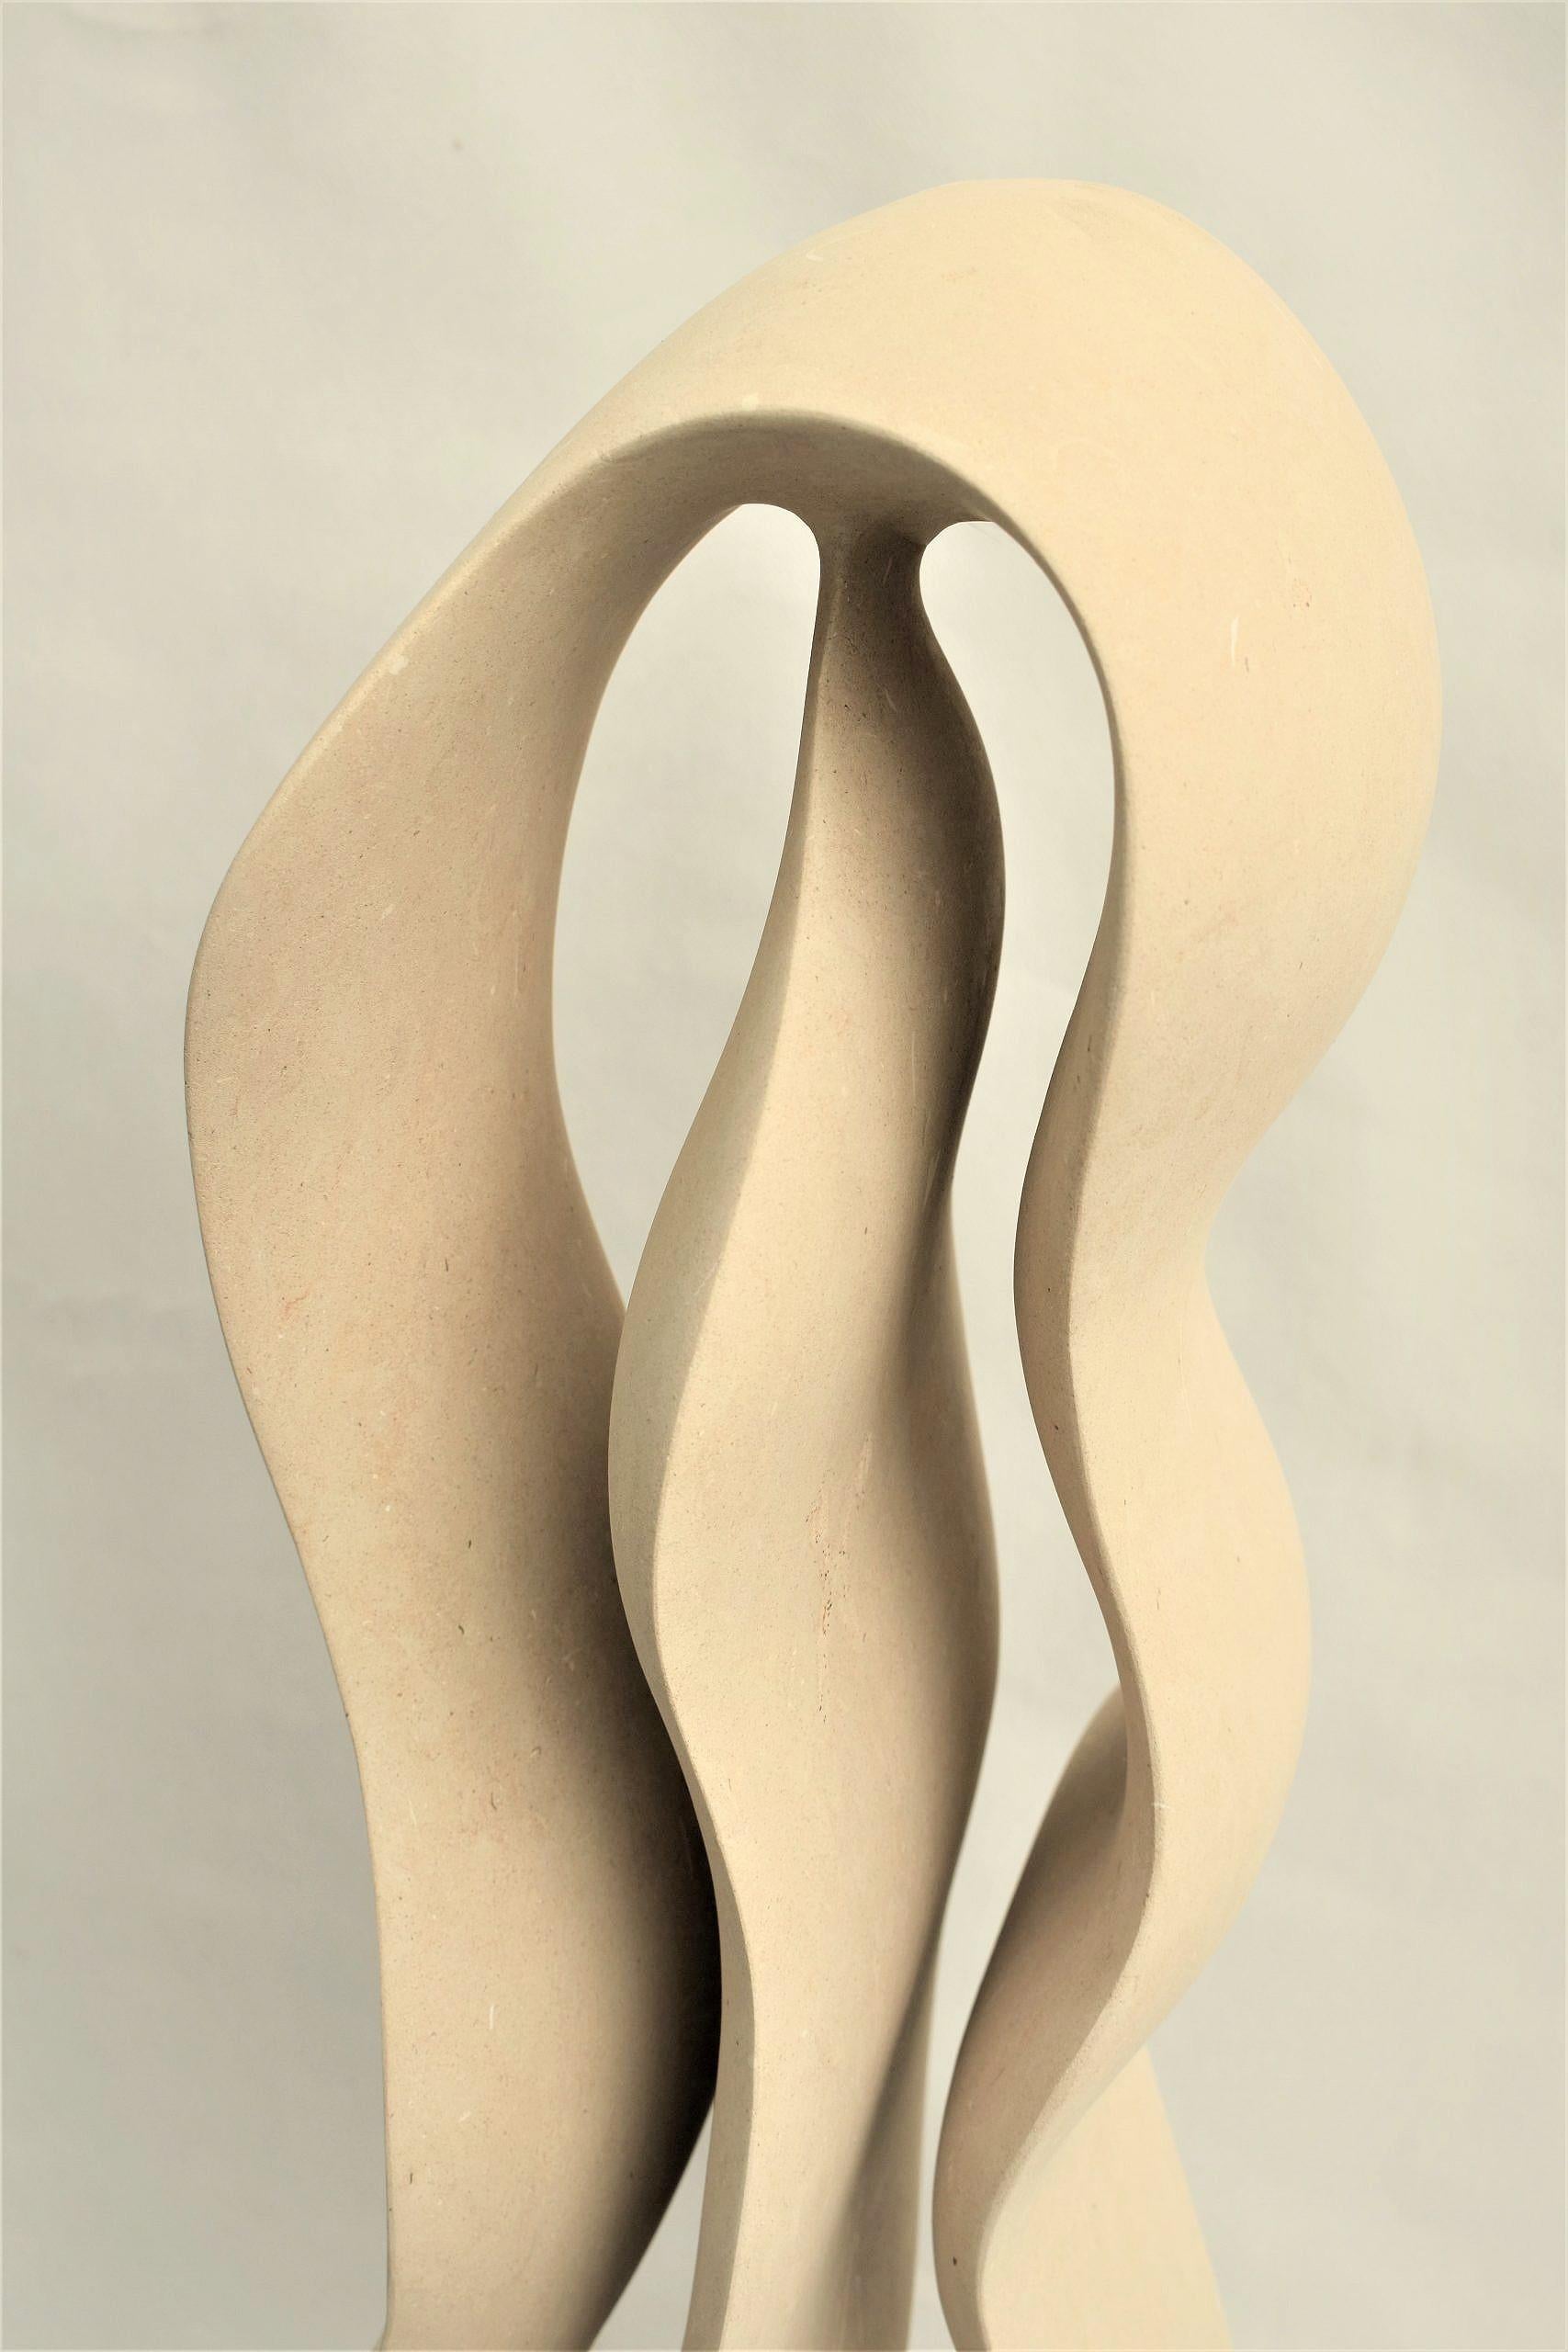 Italian 21st Century Abstract Sculpture Venere by Renzo Buttazzo For Sale